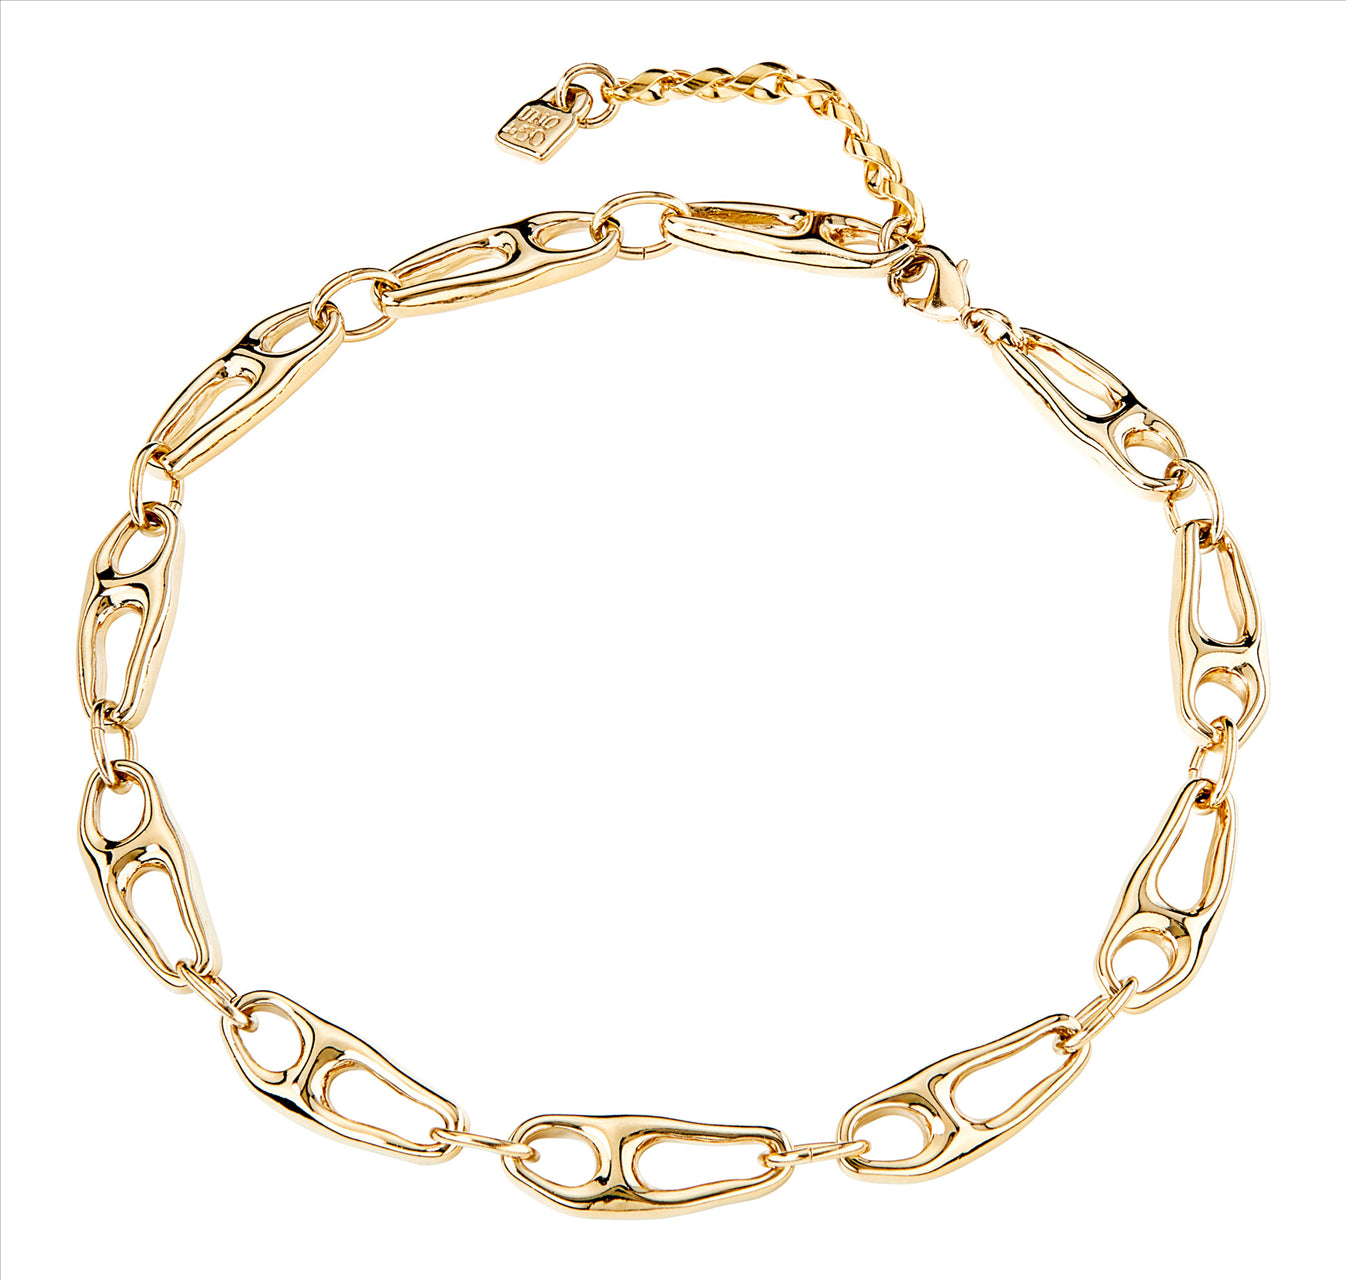 BE THE ONLY ONE NECKLACE, Necklace in metal plated in 18k gold